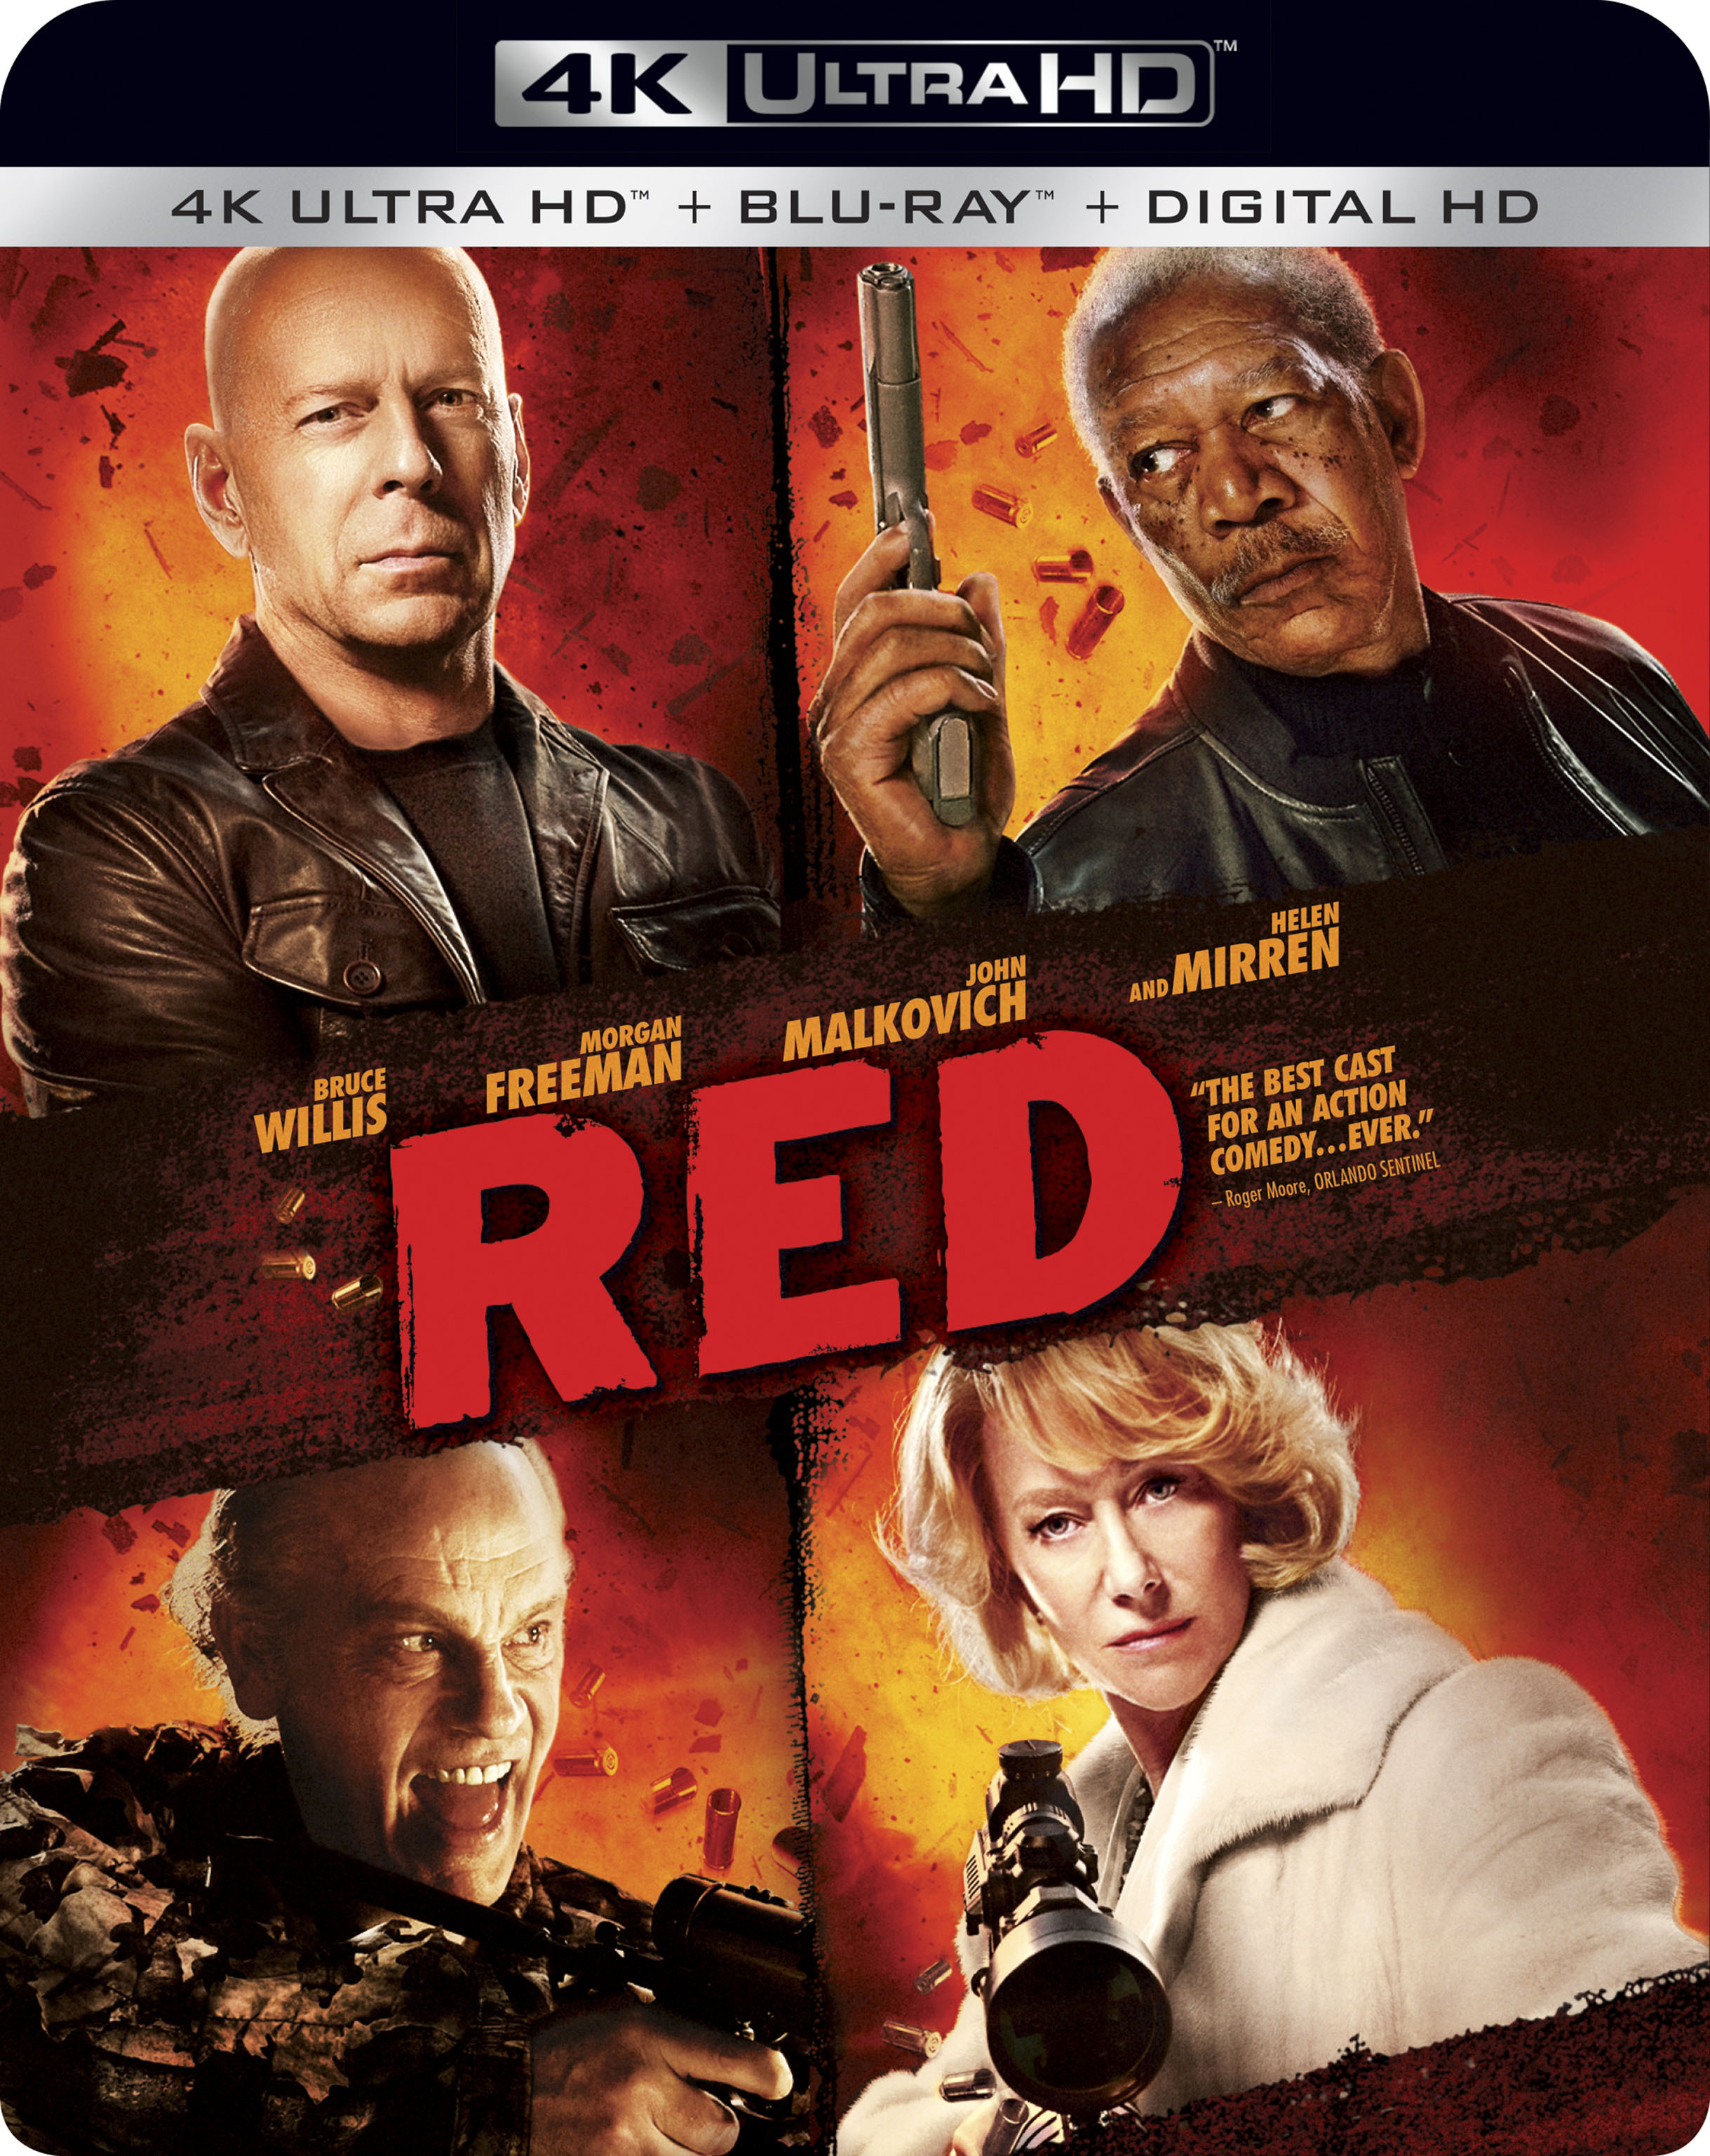 Red (4K Ultra HD + Blu-ray) - UHD [ 2010 ]  - Action Movies On 4K Ultra HD Blu-ray - Movies On GRUV